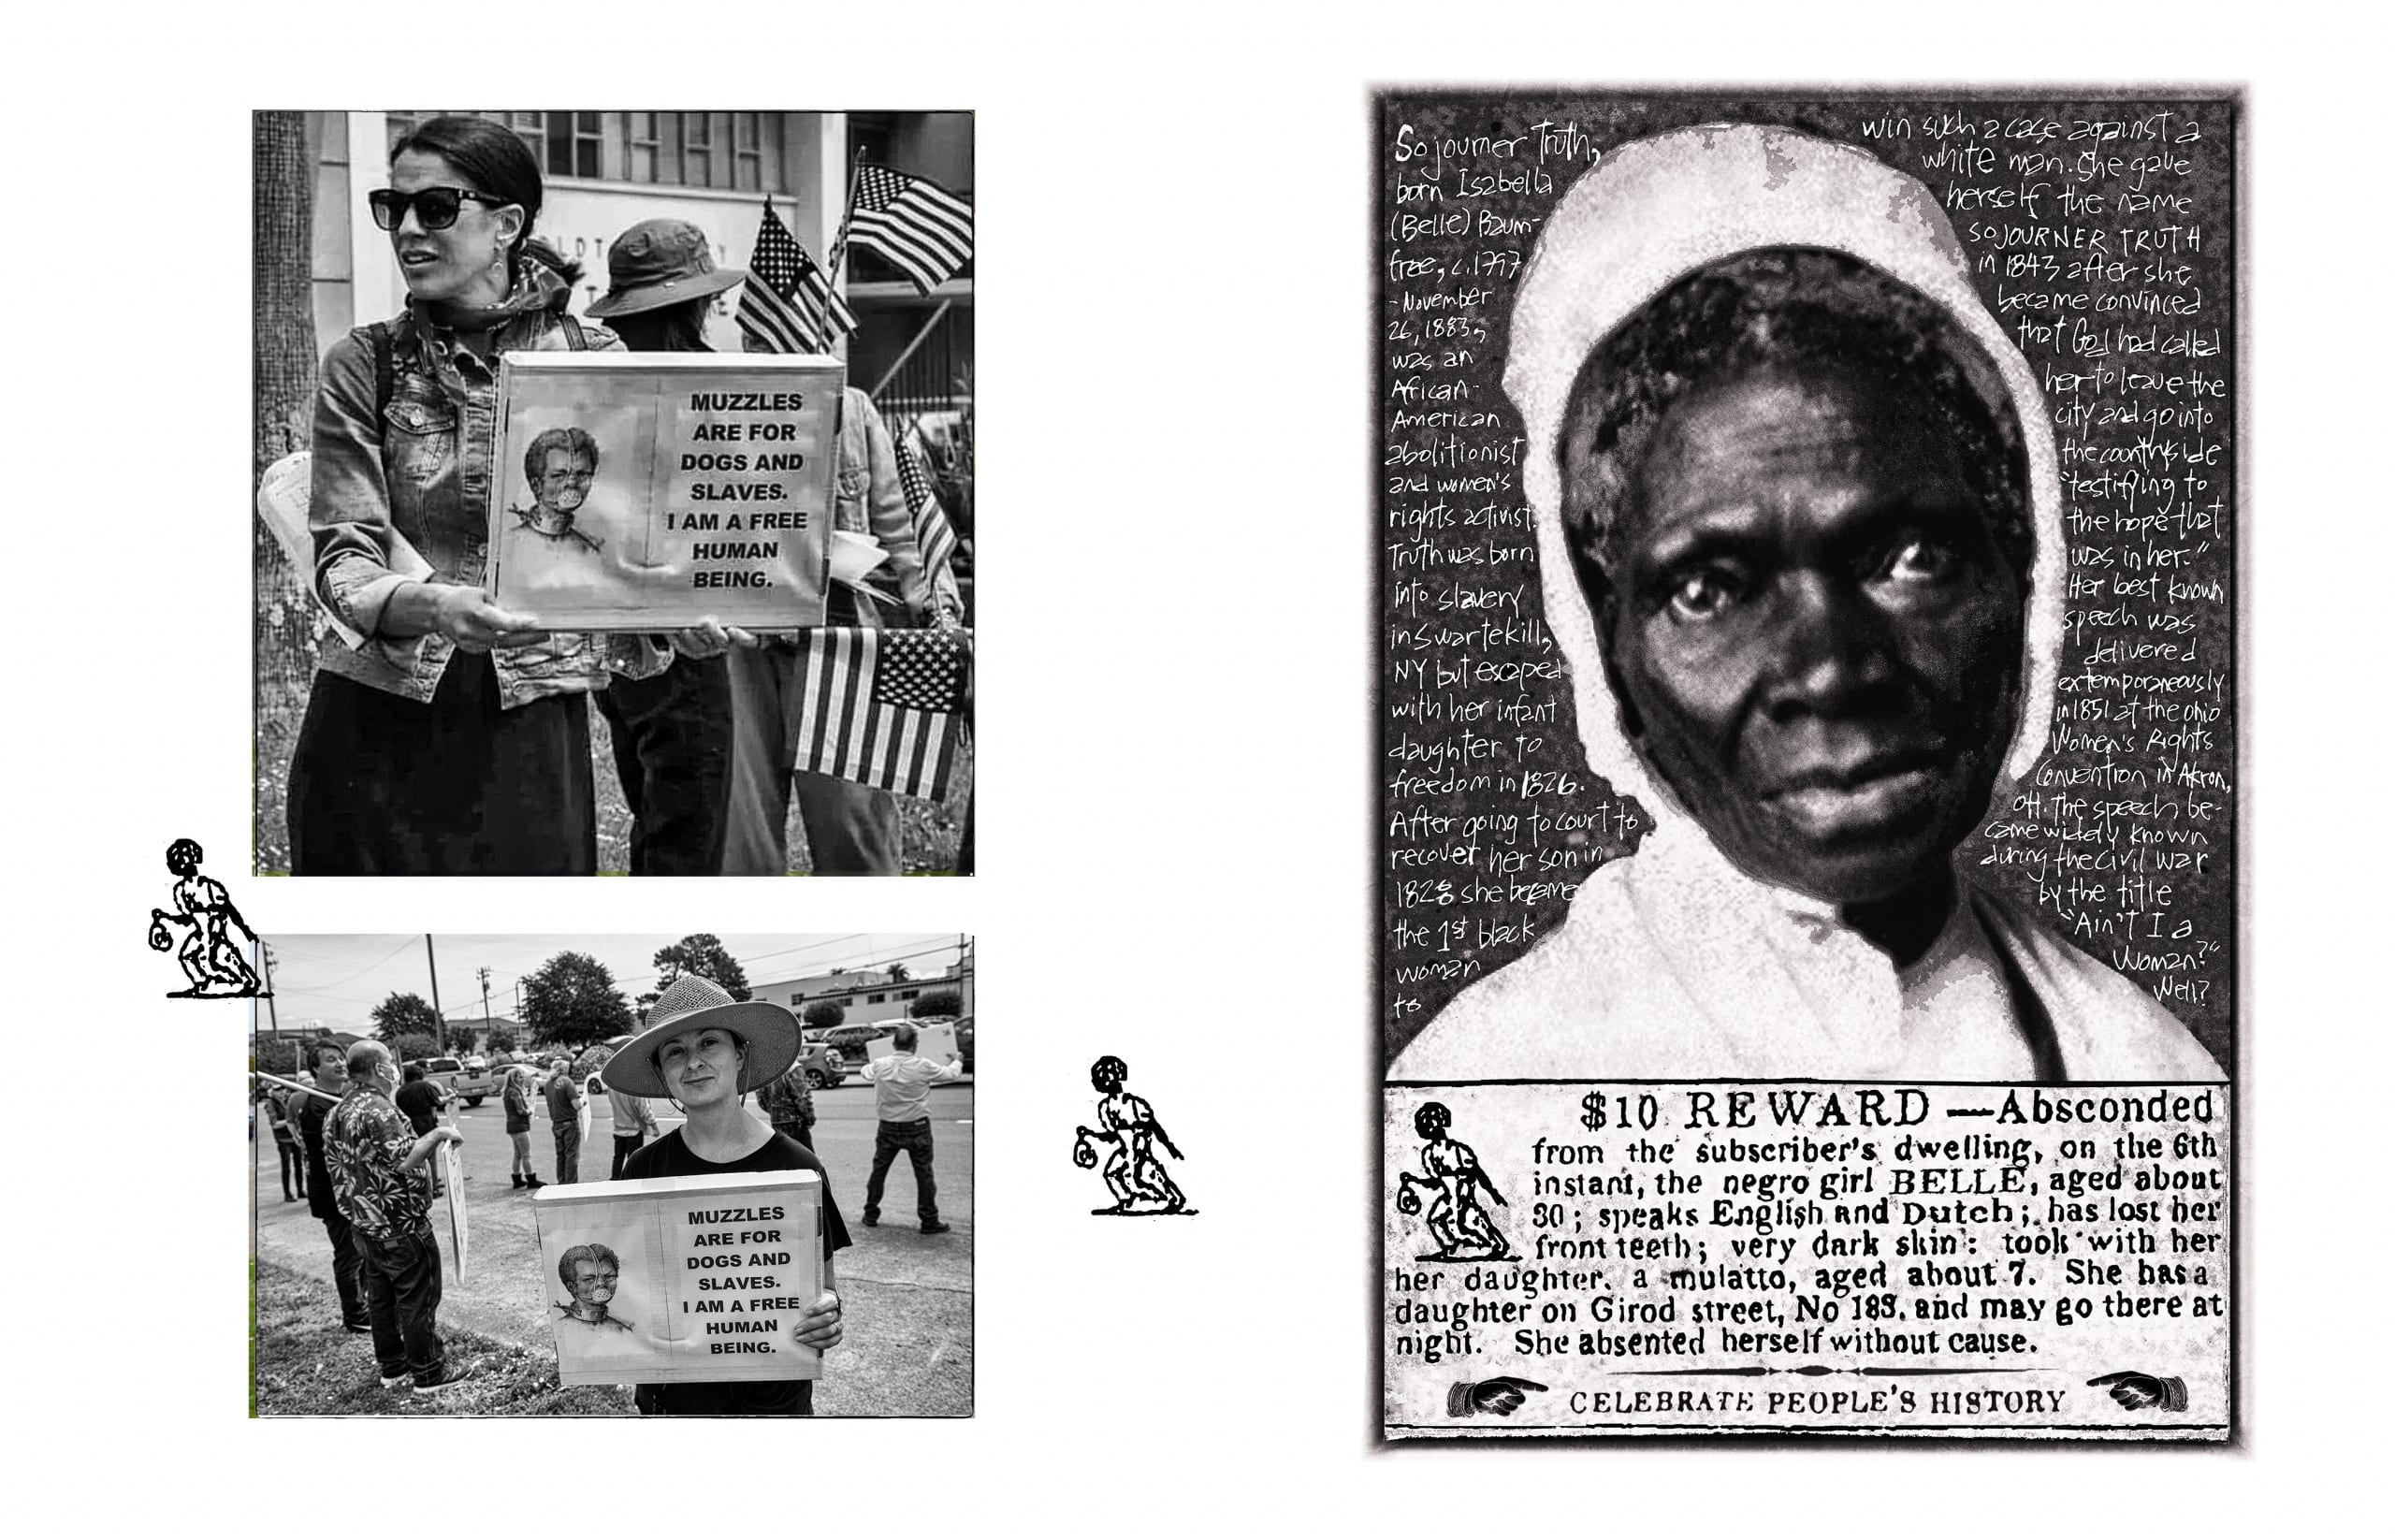 To left, two black and white photographs show two different white women protesting stay-at-home orders, both of whom hold computer printouts of an 1839 illustration of an enslaved man forced to wear a face mask and neck collar restraints. The first woman's sign reads, "Muzzles are for dogs and slaves. I am a free human being"; she is surrounded by multiple American flags waved by other protestestors. The photos are flanked by two small reproductions of 18th-century newspaper icons of self-liberated persons. To right, a reproduction of a historical portrait photograph of Sojourner Truth; a short, handwritten biographical text appears over the gray background surrounding Truth's image. The portrait rests on top of a newspaper advertisement for a reward in helping a slave owner locate a self-liberated woman and her young seven-year old daughter